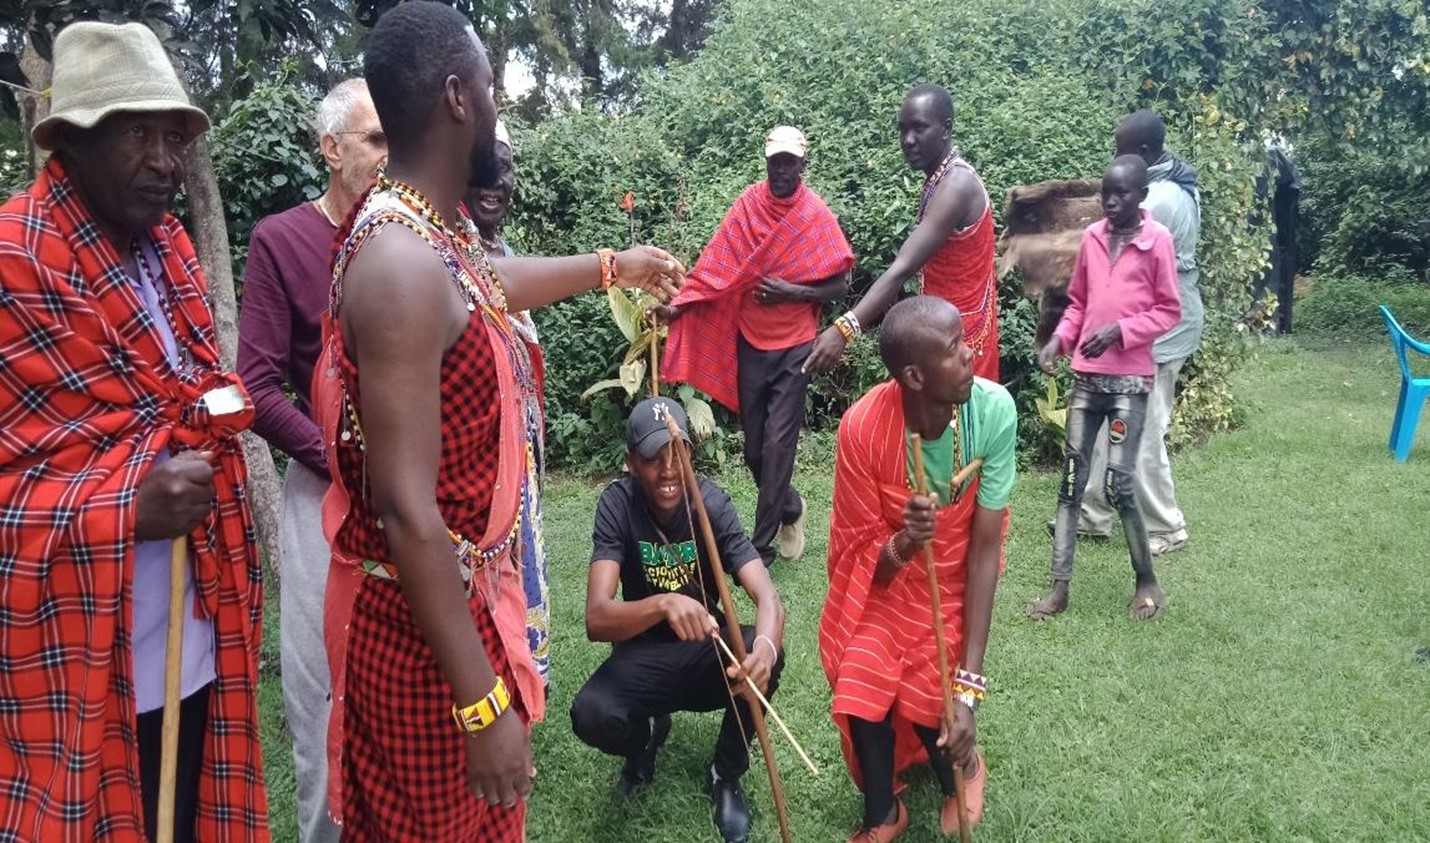 Group of Maasai and Kisii men gathering in a park.